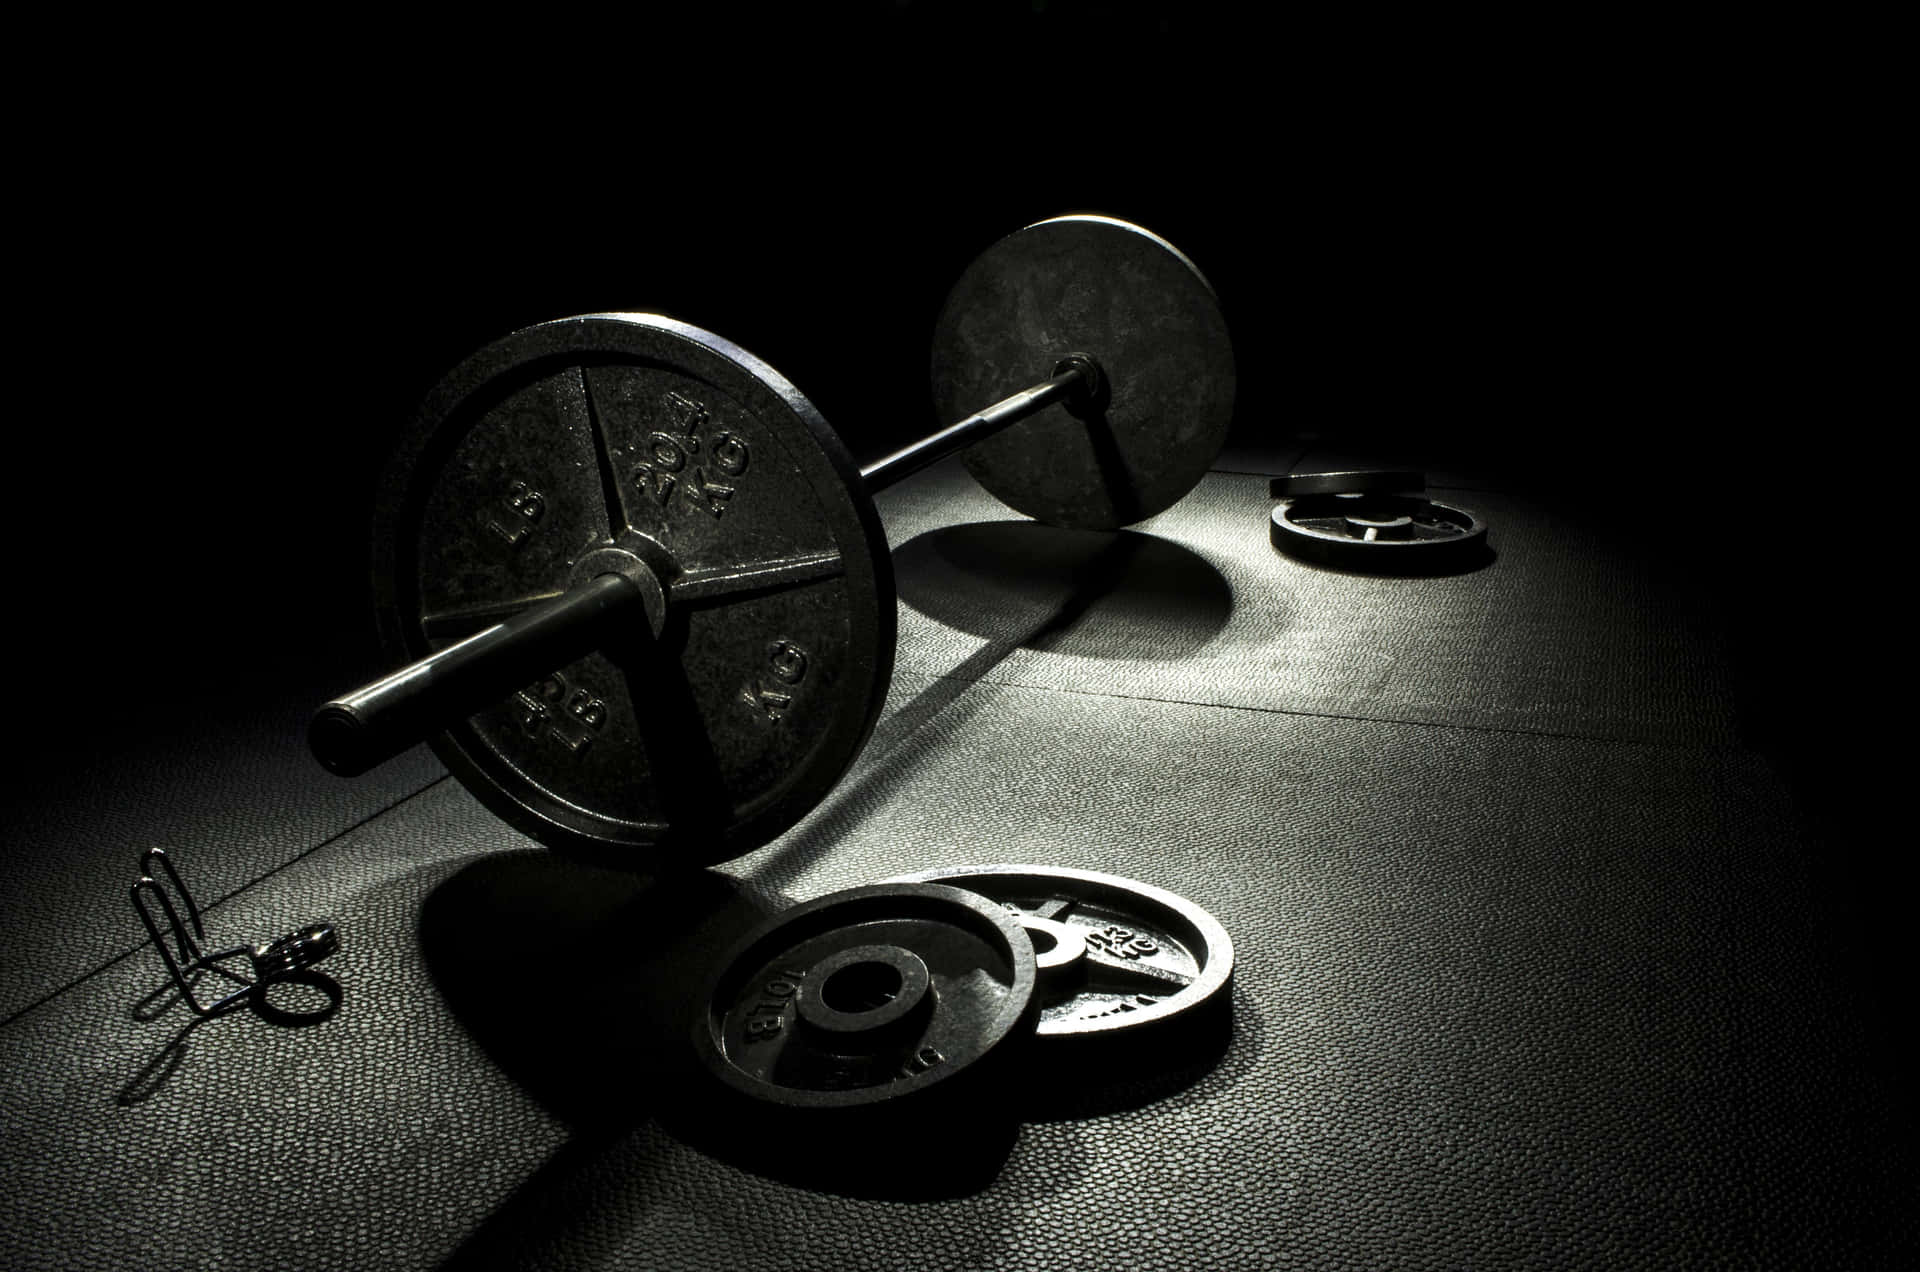 Get strong and fit with barbell training